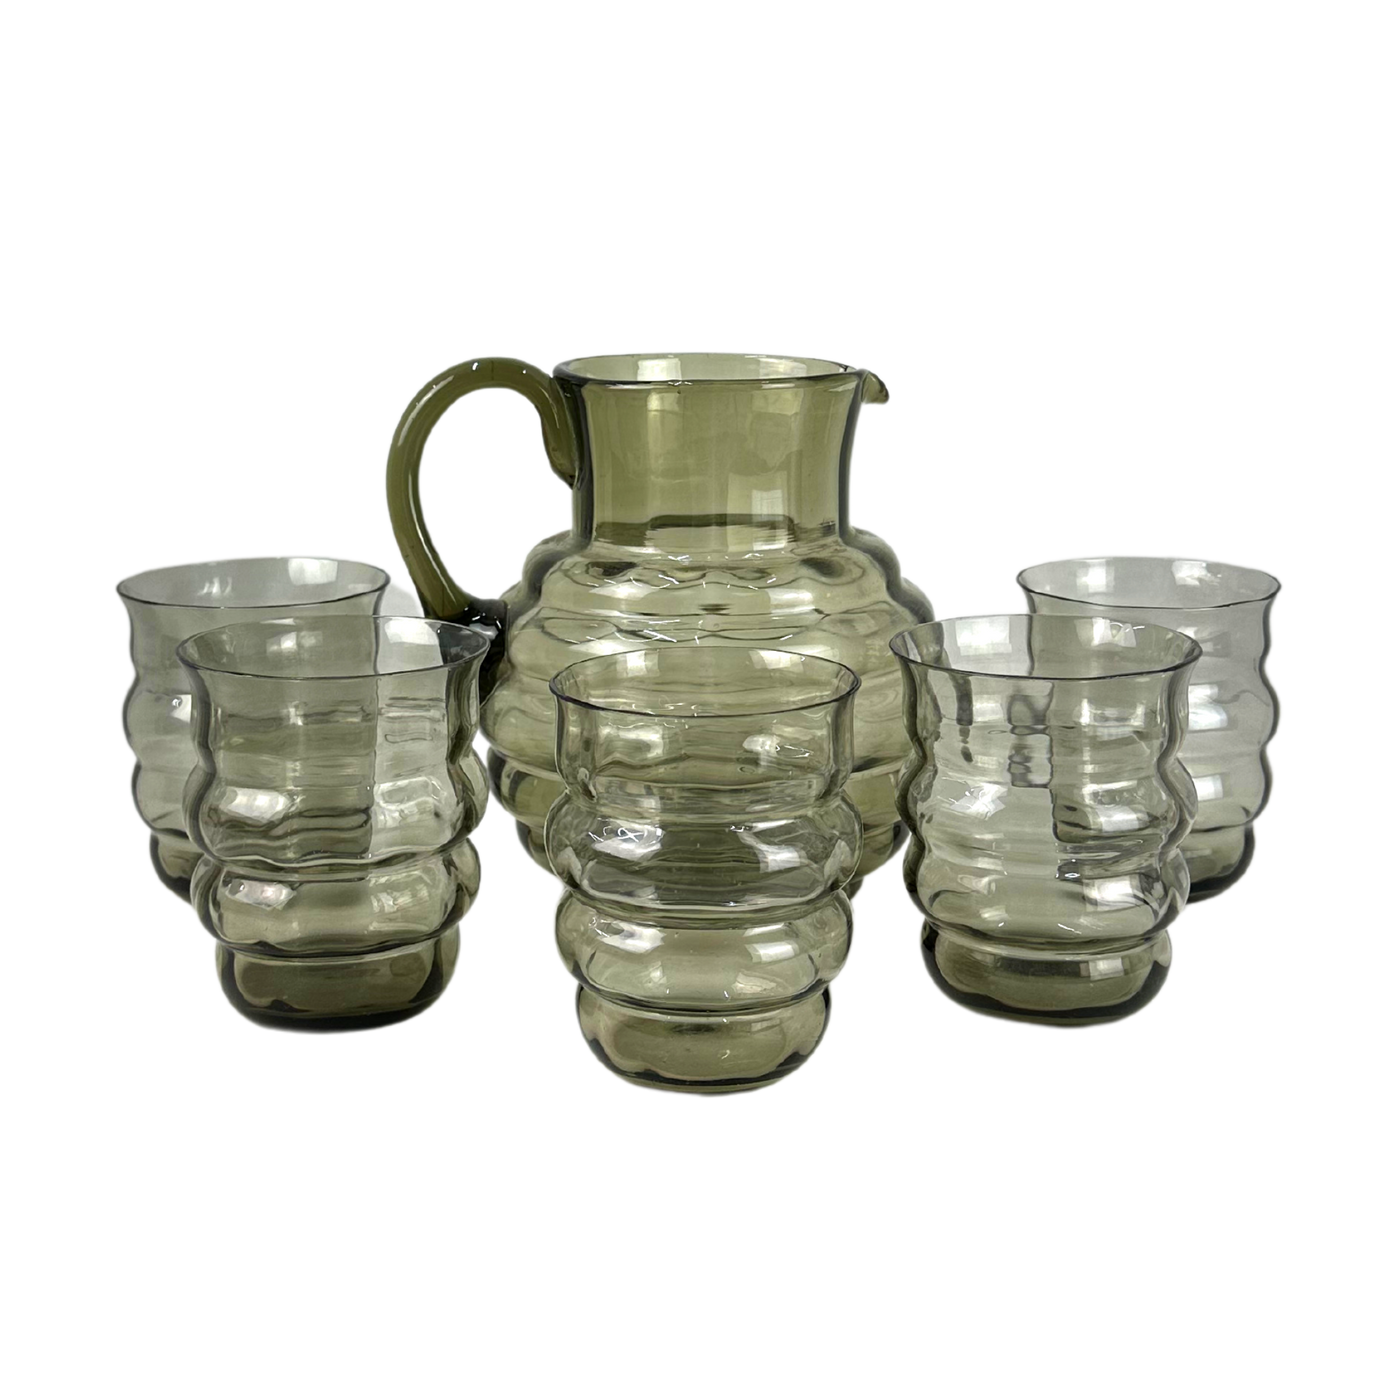 Vintage Smoked Glass Pitcher and 5 Glasses